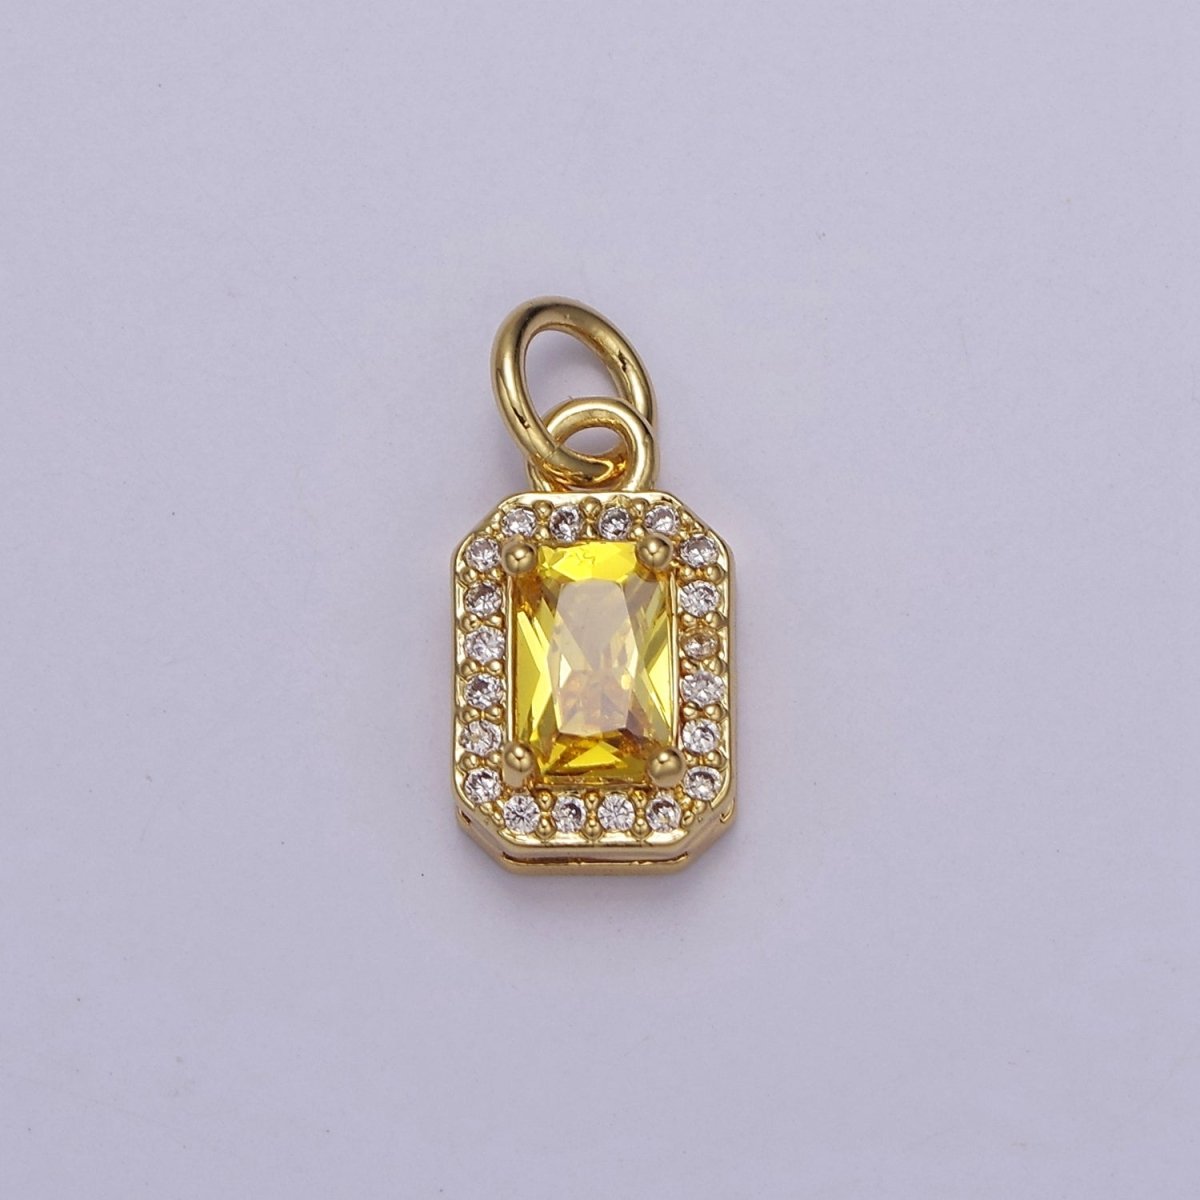 24k Gold Filled Rectangle Birthstone Charm ,Mini Colorful CZ Pendant for Personalized Jewelry Making E715 - E719 - DLUXCA